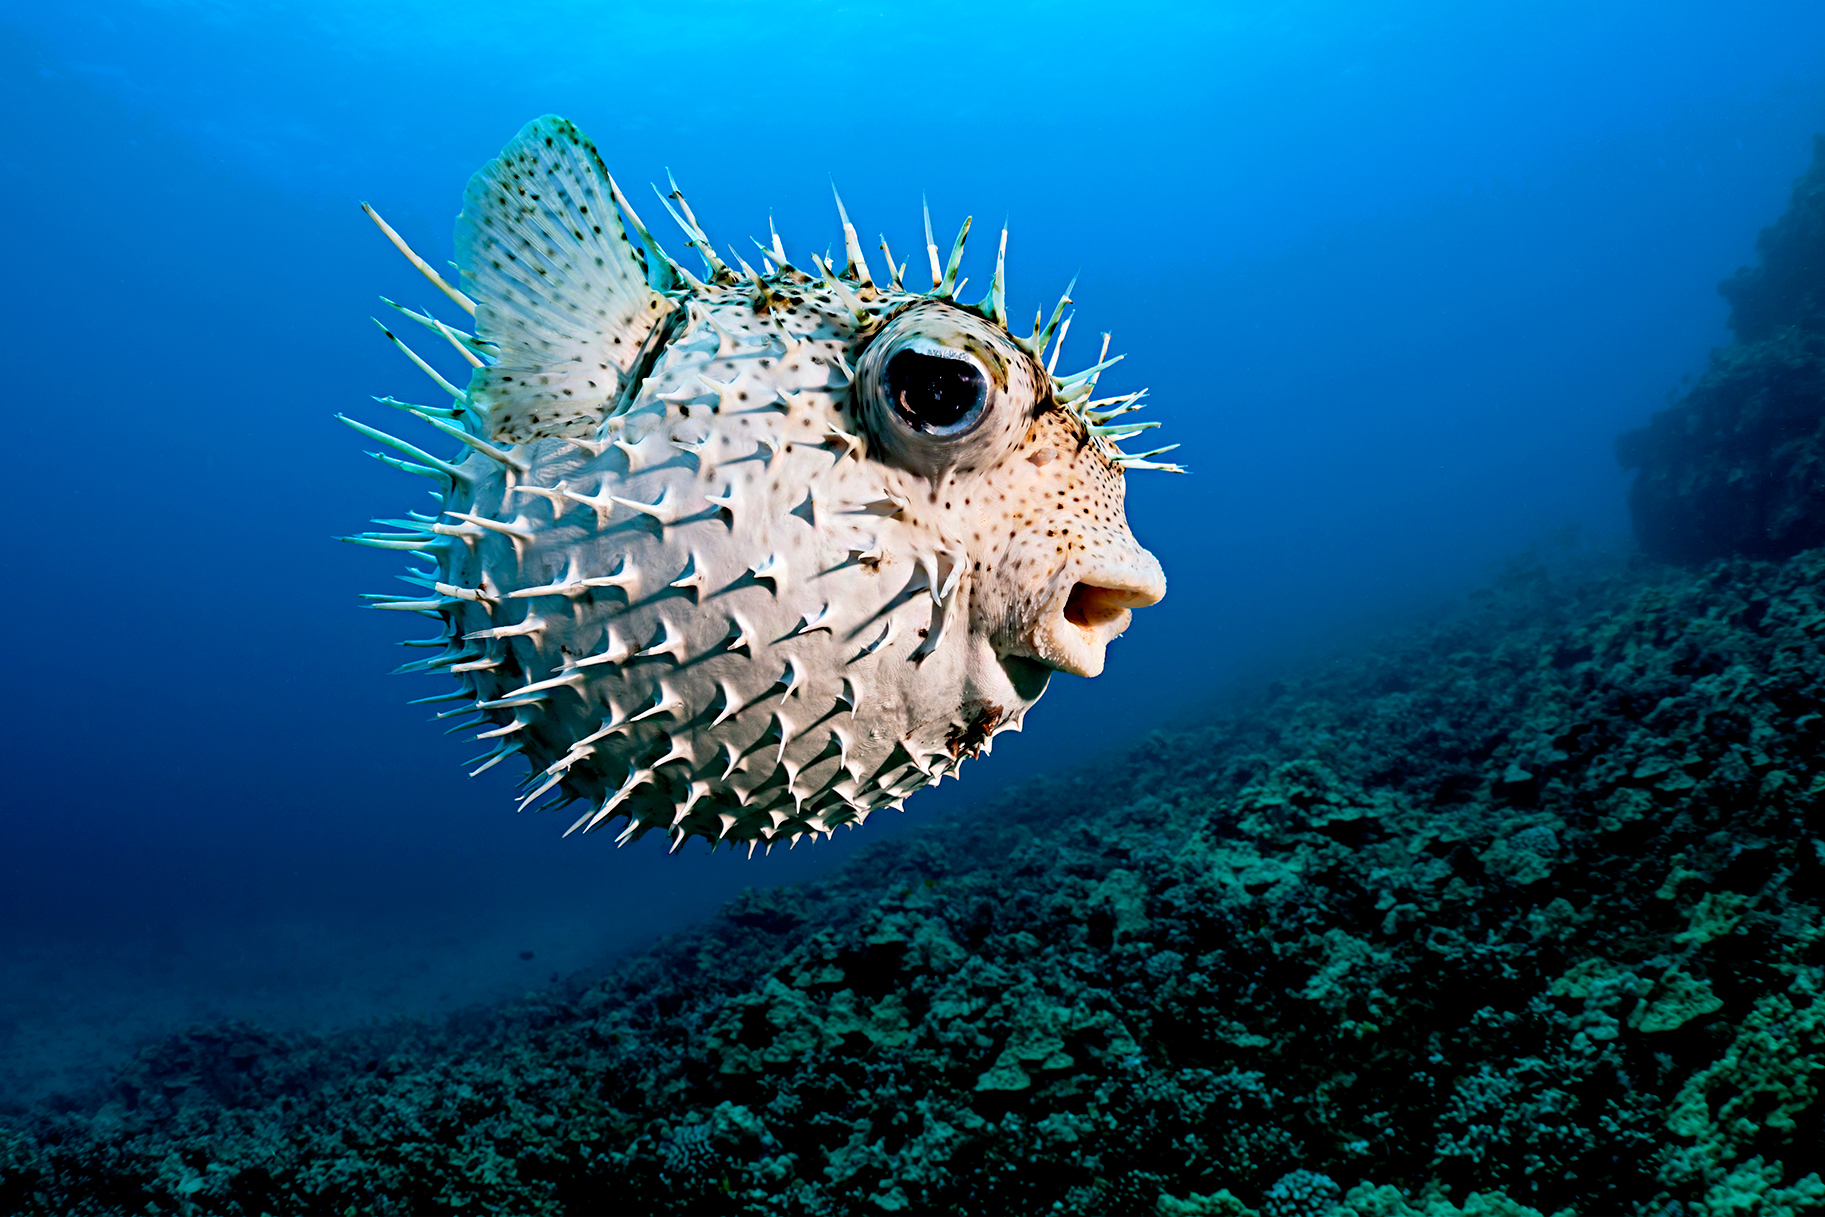 Japanese Company Develops Non Poisonous Fugu Puffer Fish | The Feast